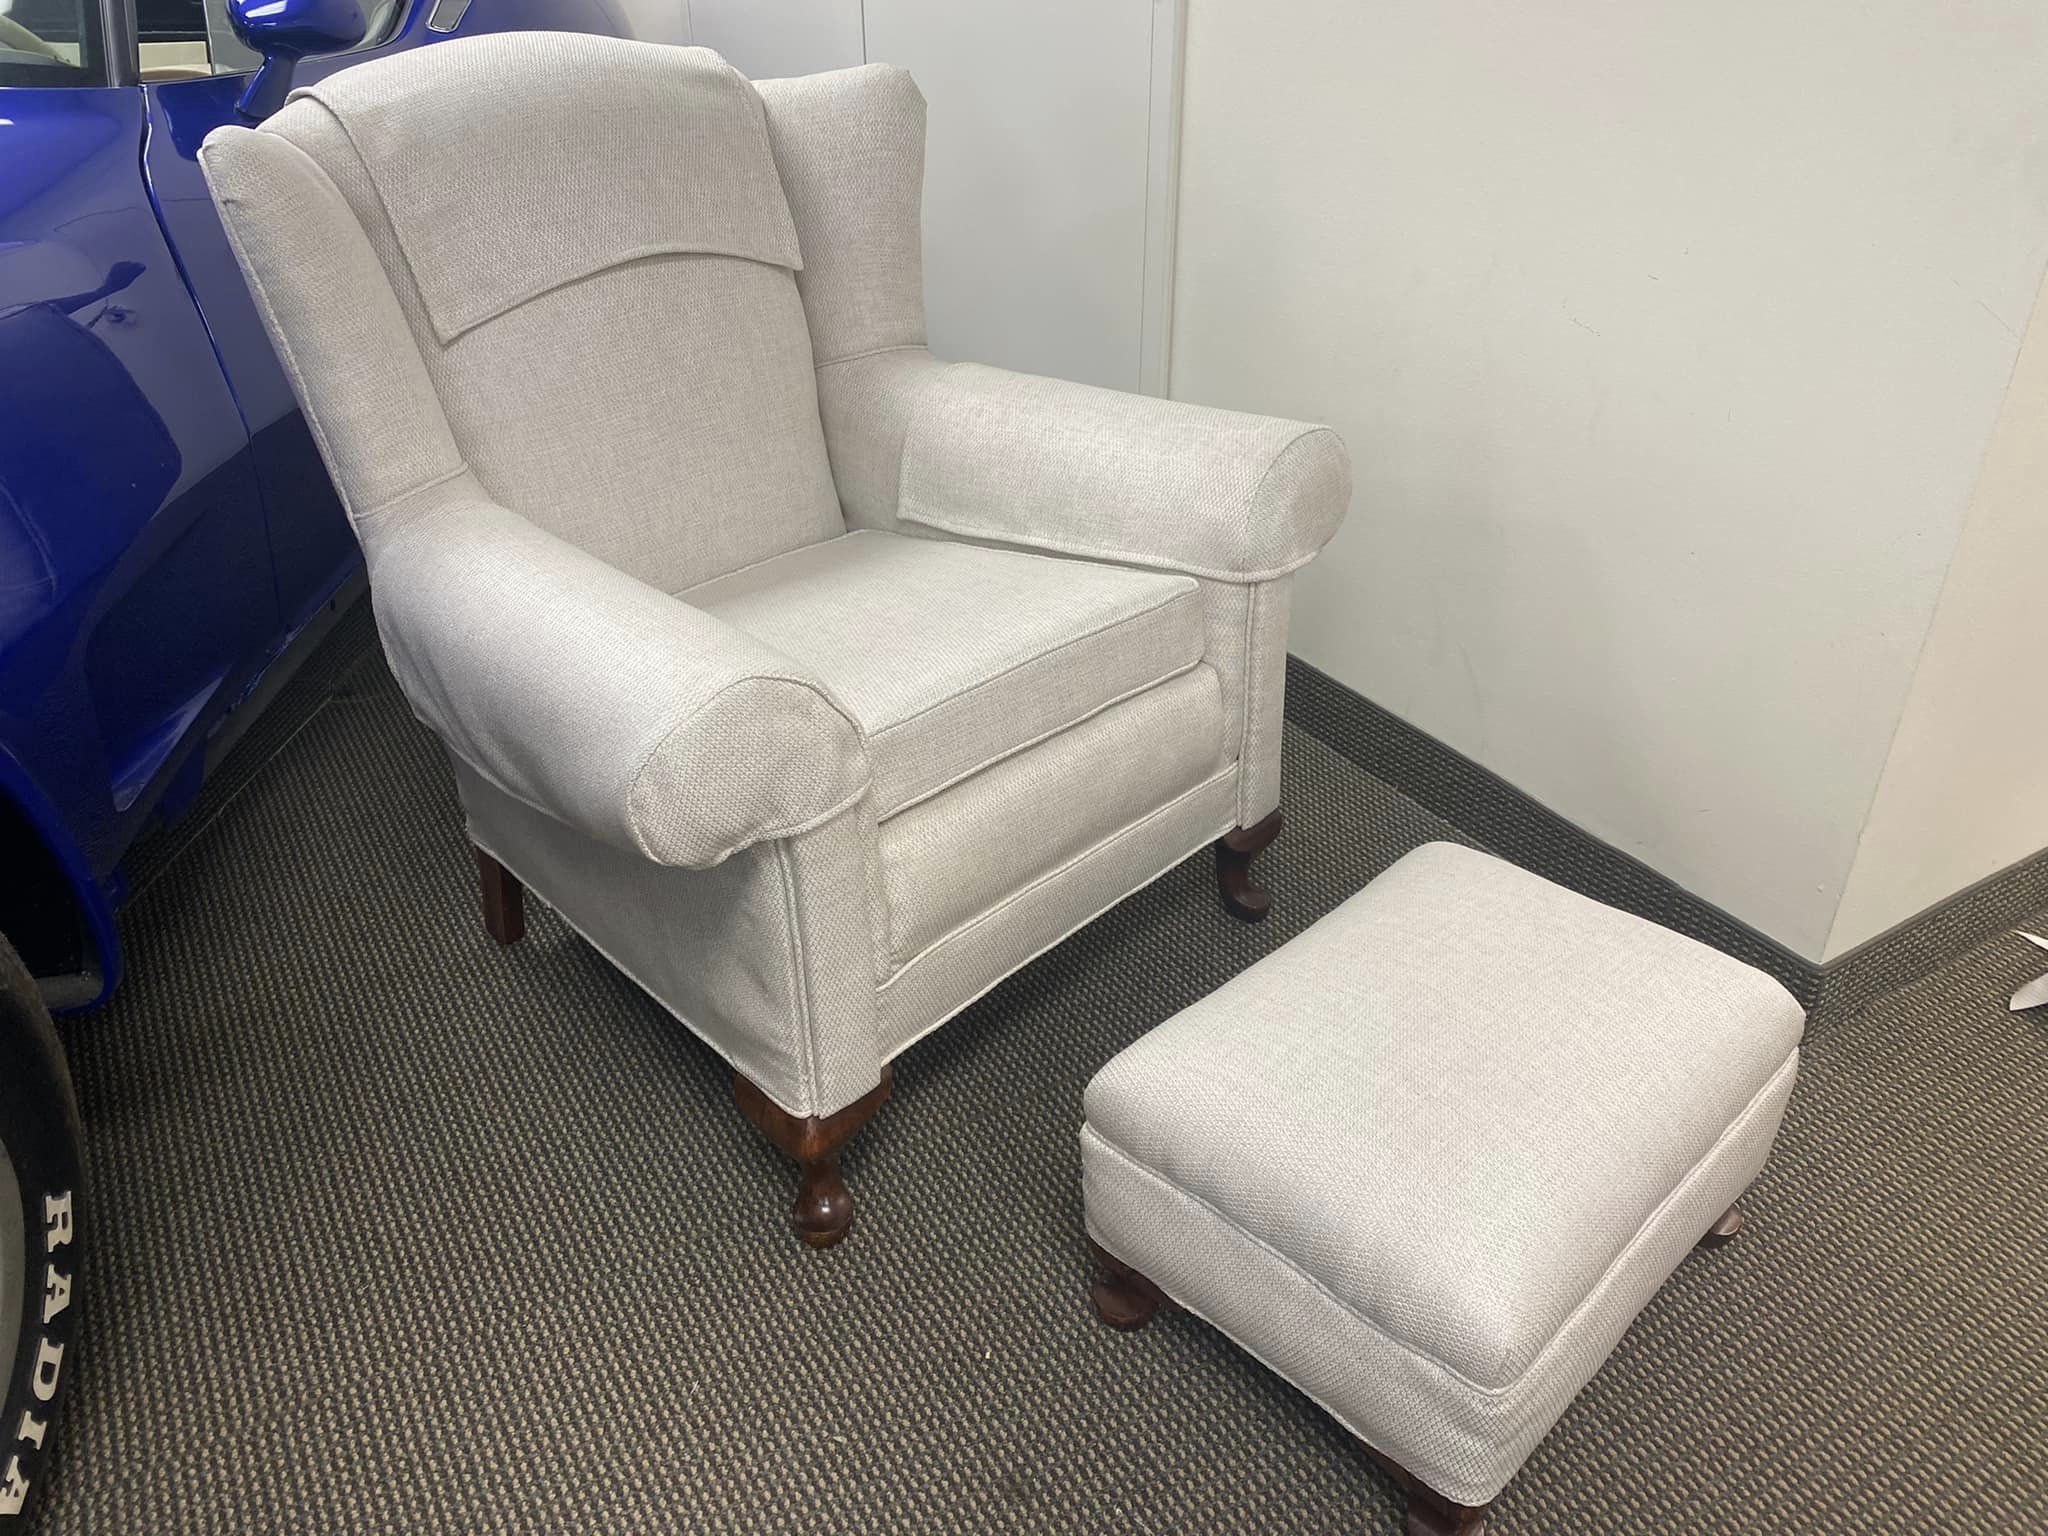 Chair and Matching Ottoman in white